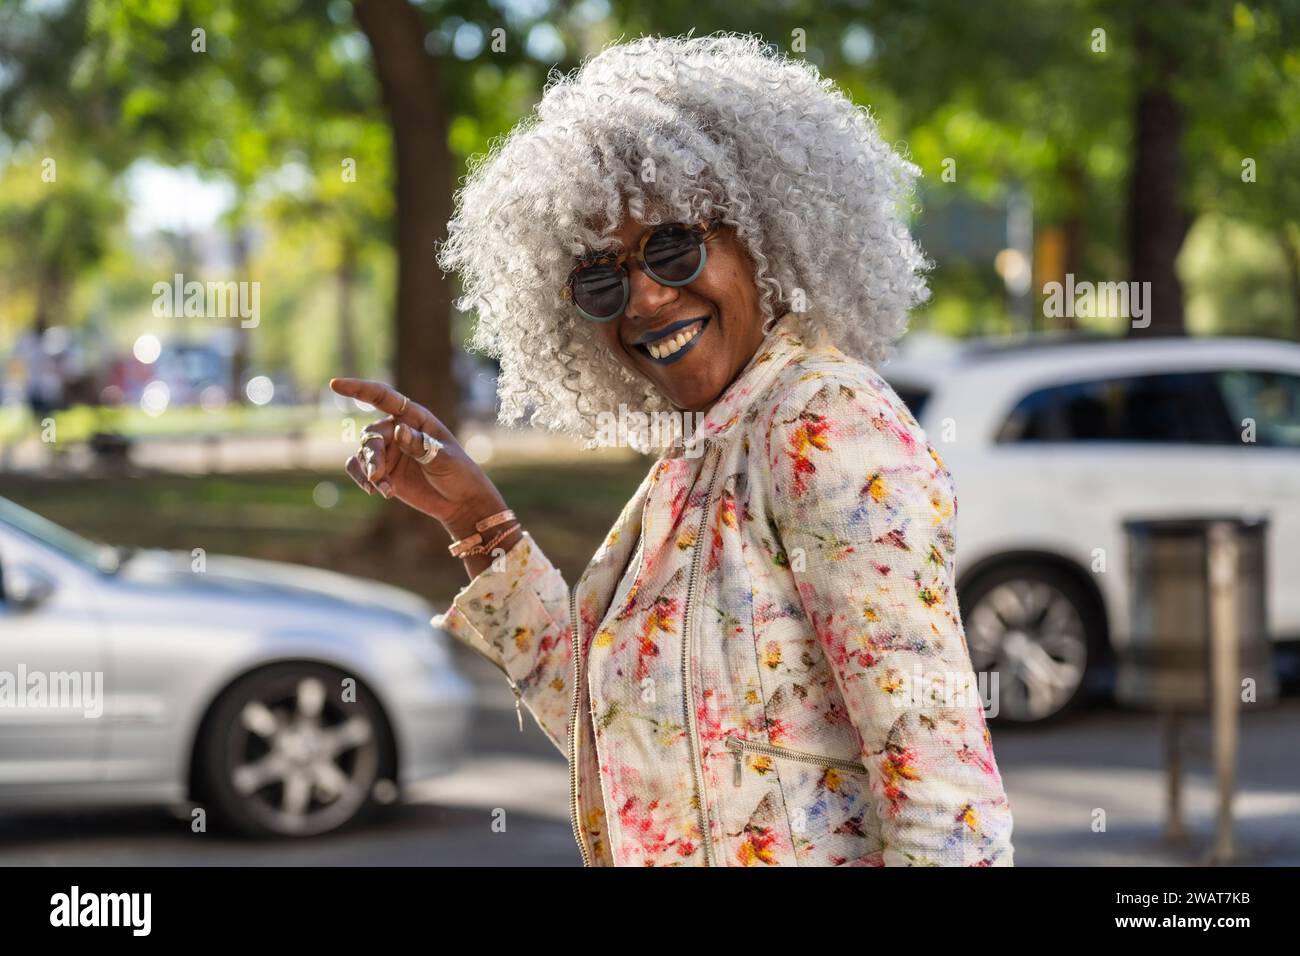 Self-confident, black lady with hoary afro hair and sunglasses smiling while walking in a sunny city center. Concept: pro-aging, happiness Stock Photo